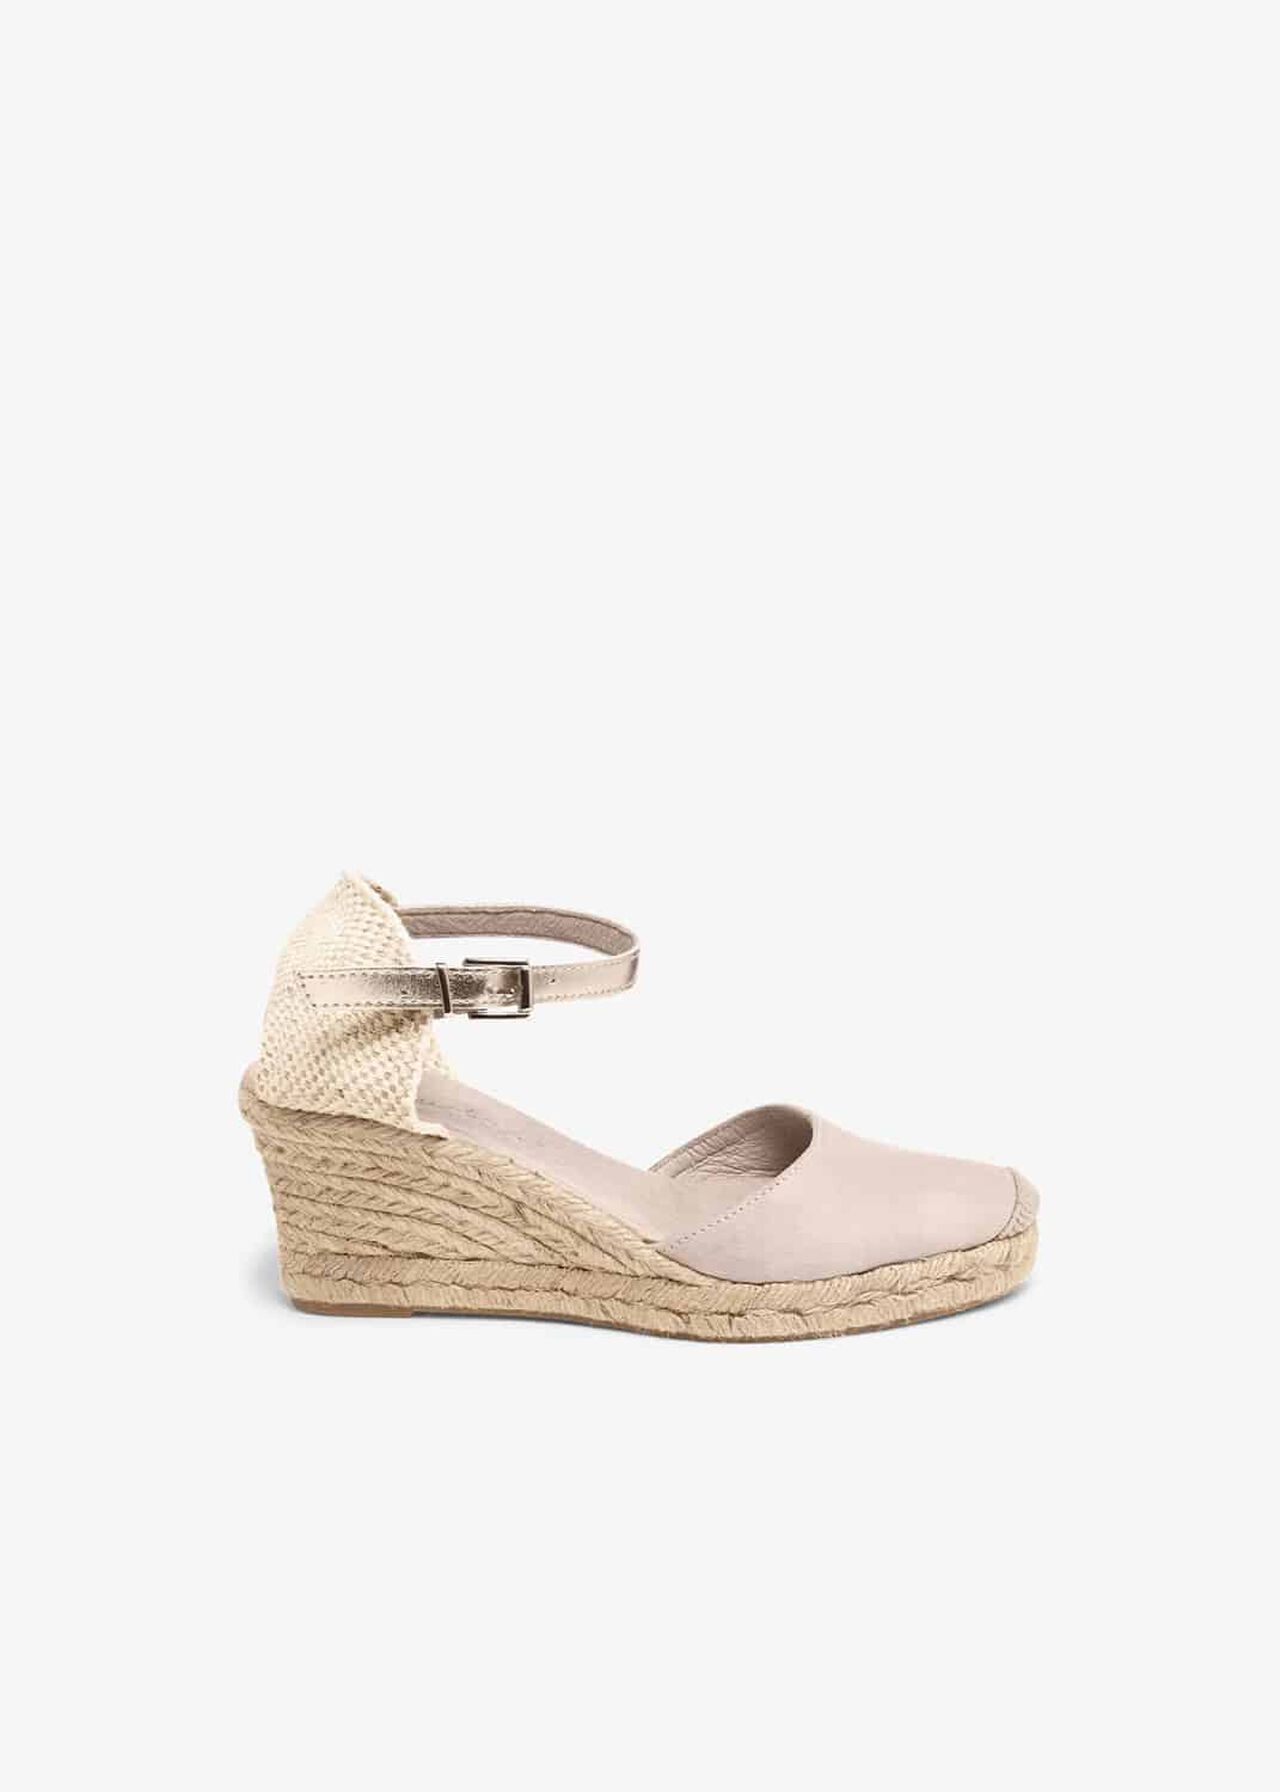 Kimmy Leather Espadrille Wedge Shoes | Phase Eight